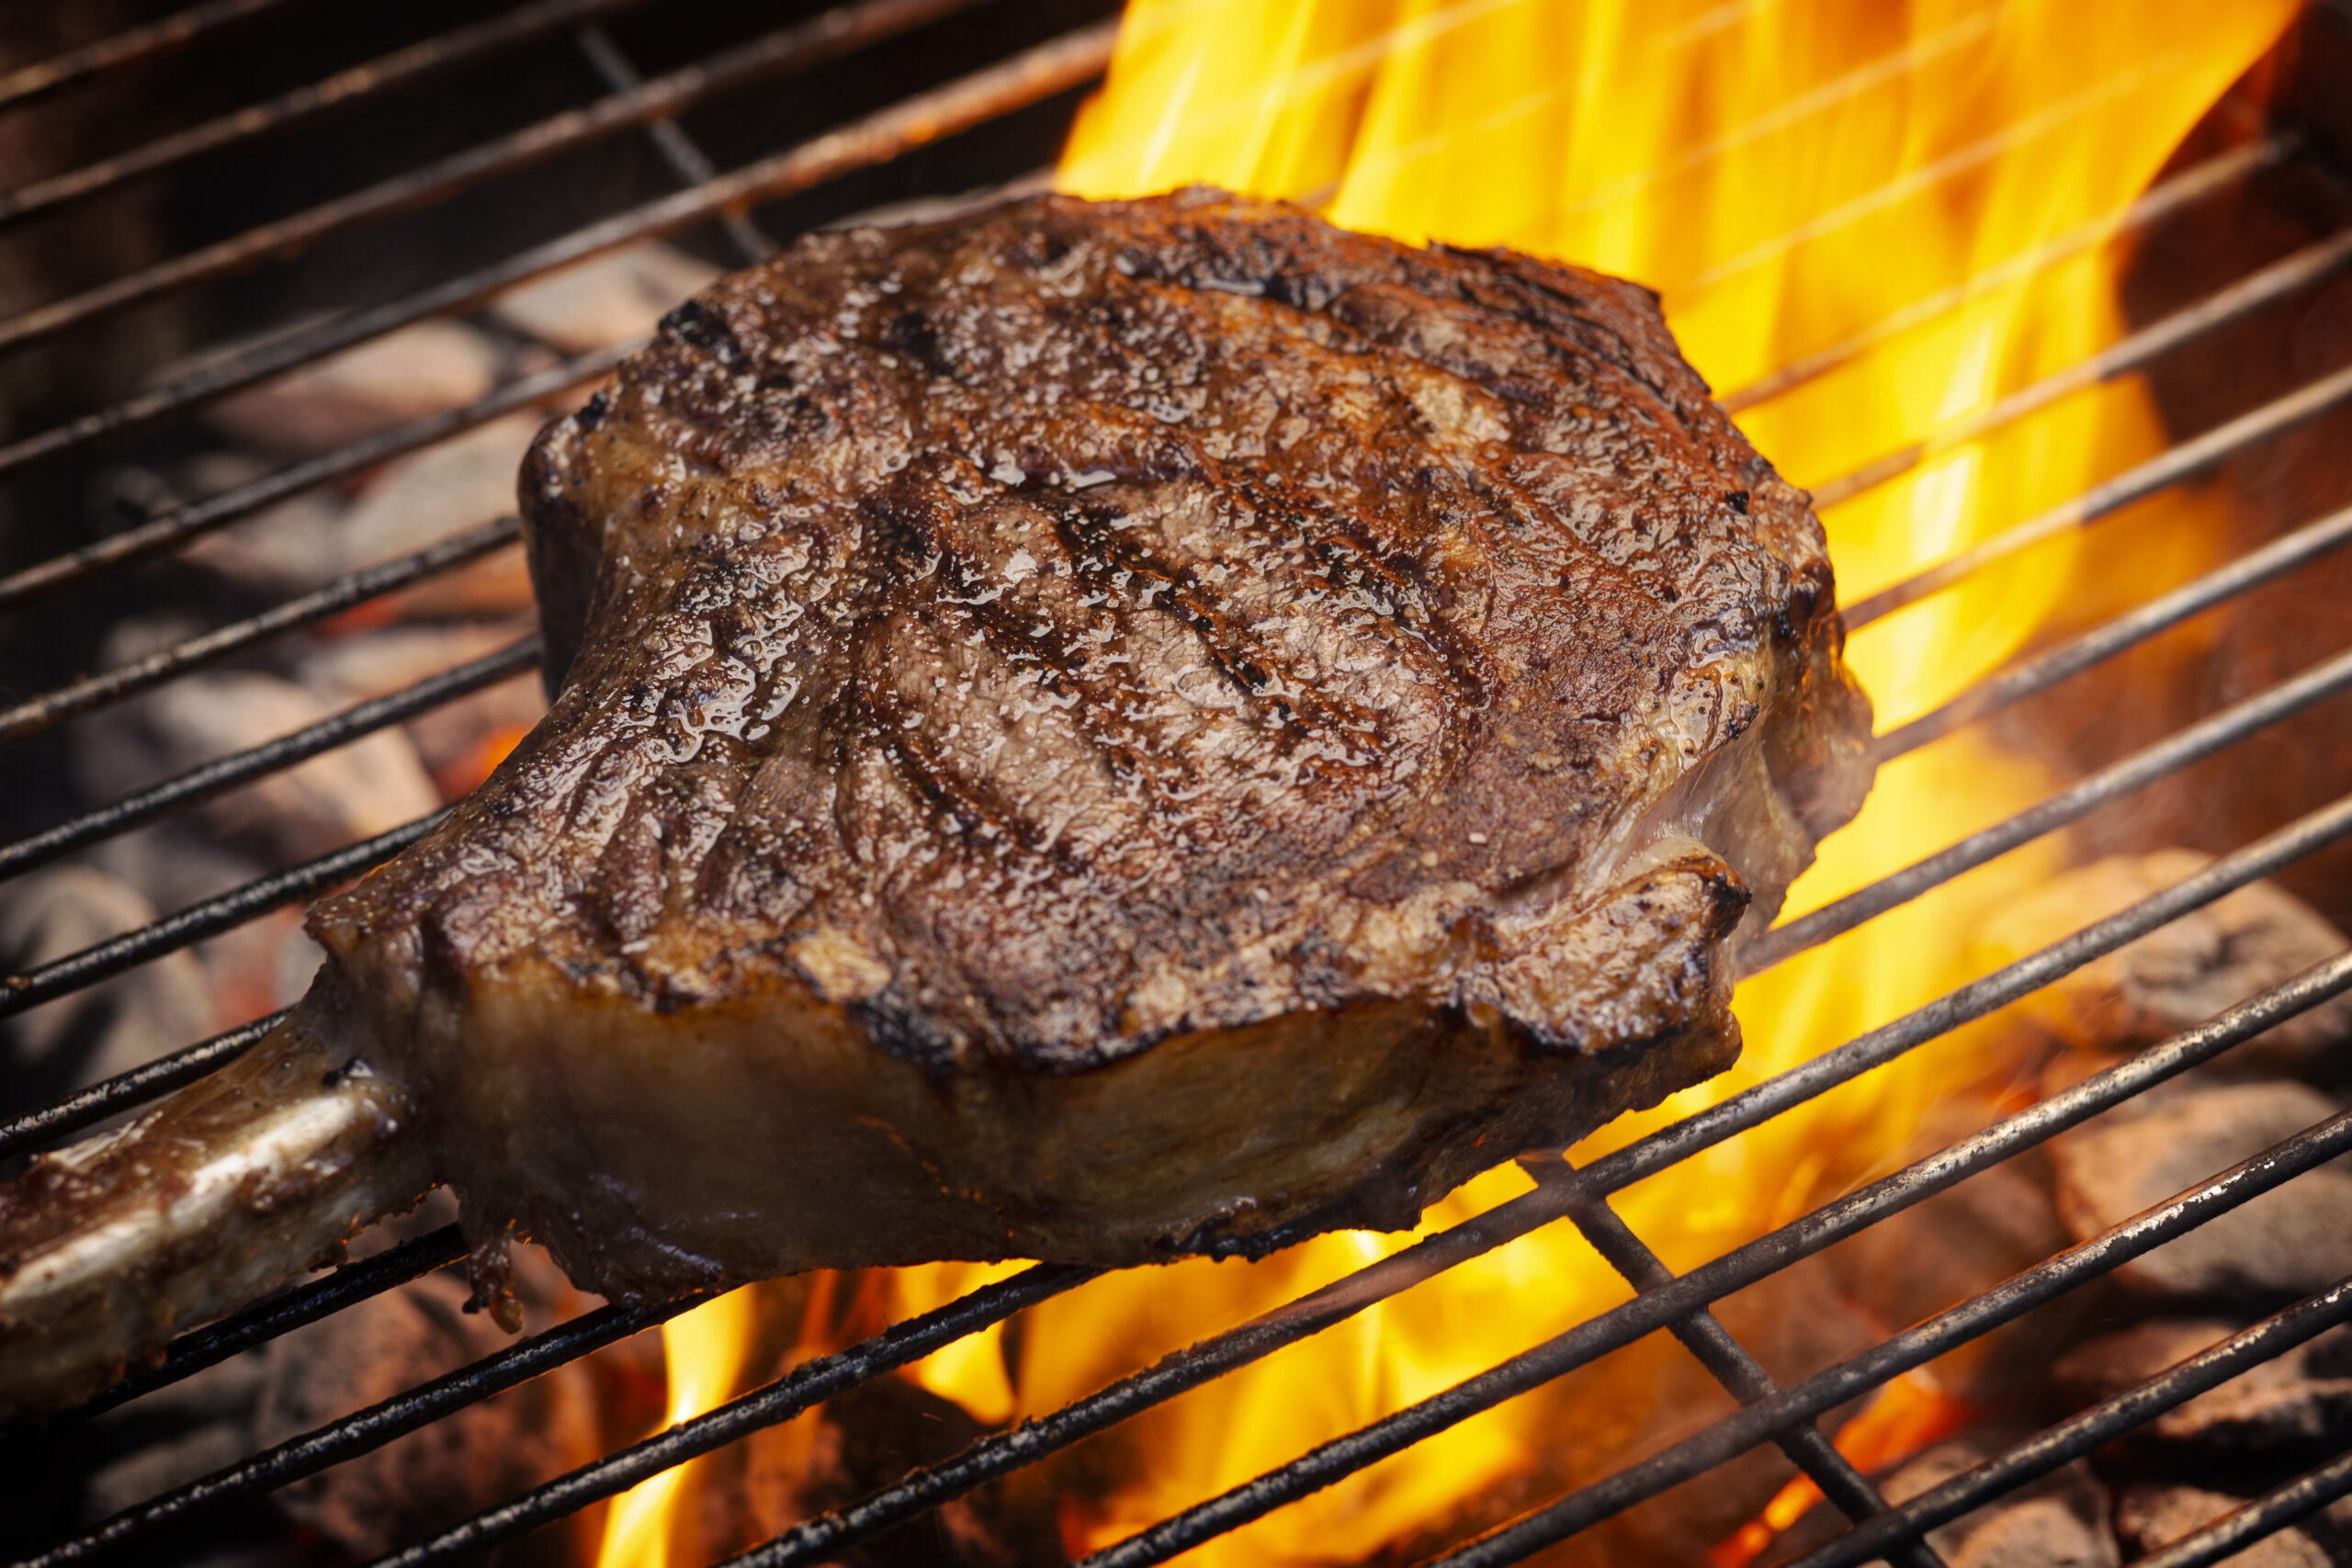 a bone-in tomahawk ribeye steak cooking on grill with flames, angled view